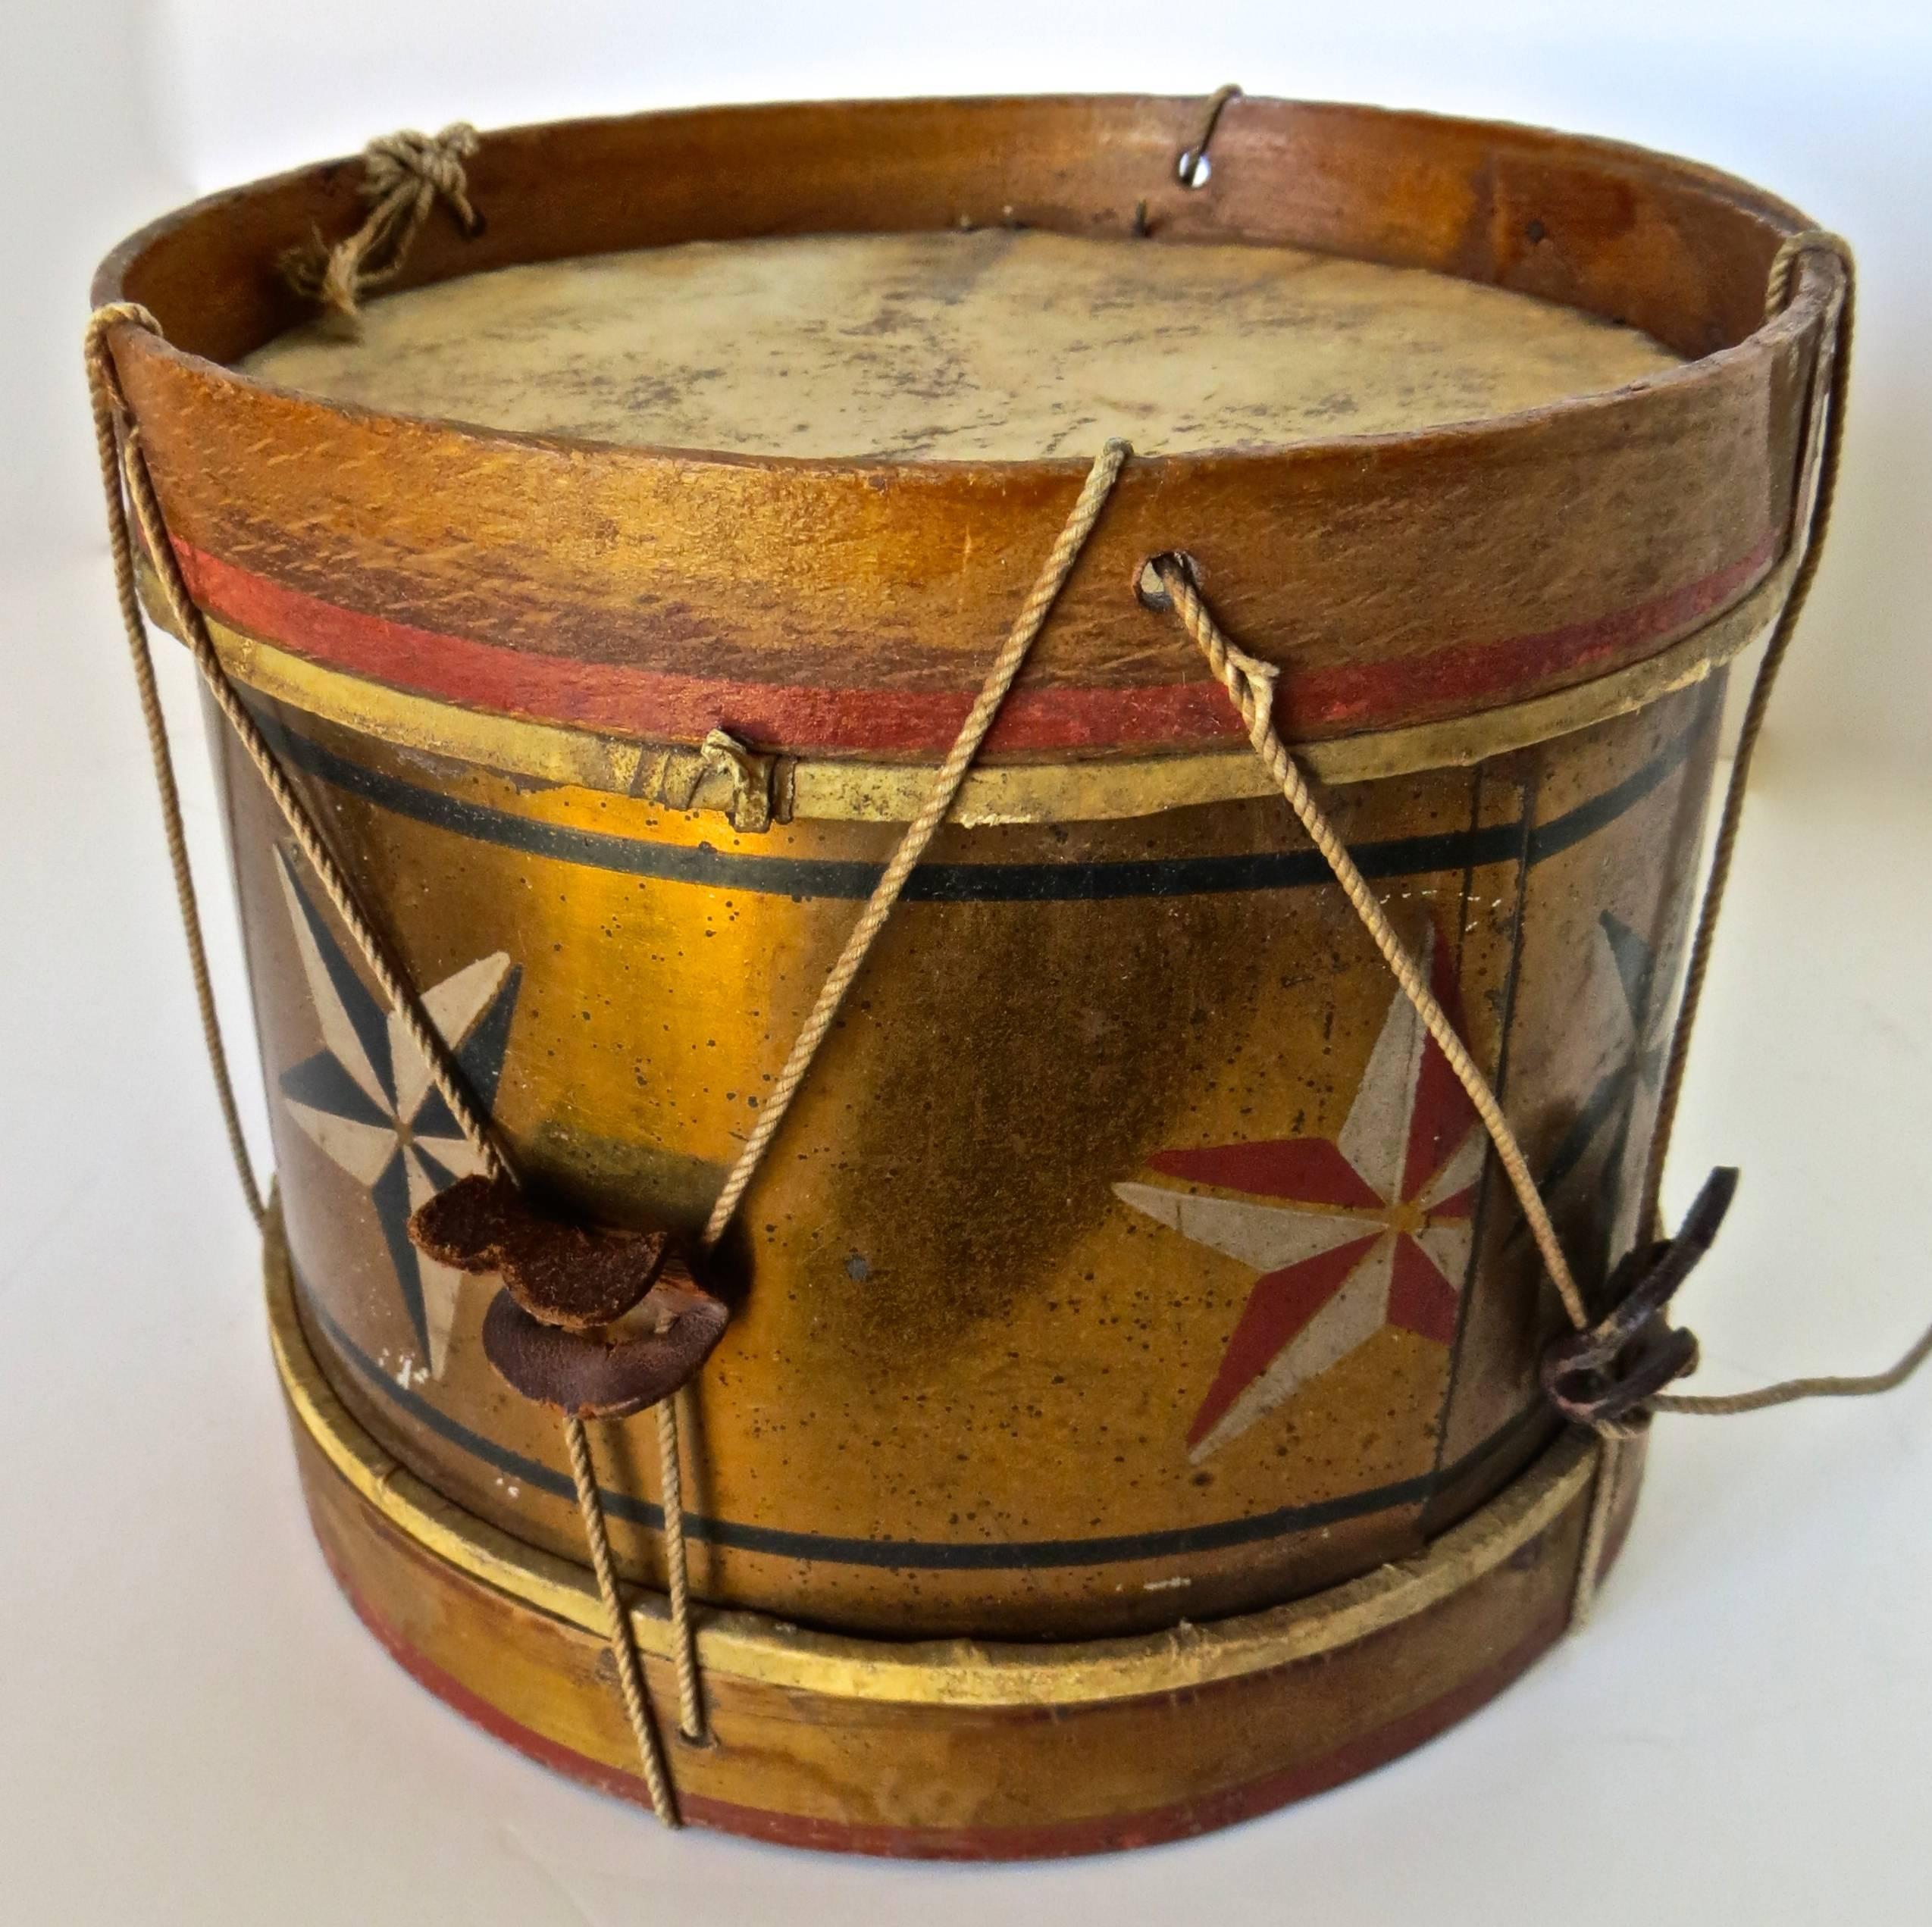 Wonderful folk art item and a reminiscent article of Americana consists of a child's toy drum with hand-painted decoration and a patriotic theme, with a pair of hand-painted American flags and stars around the perimeter along with two hand-painted